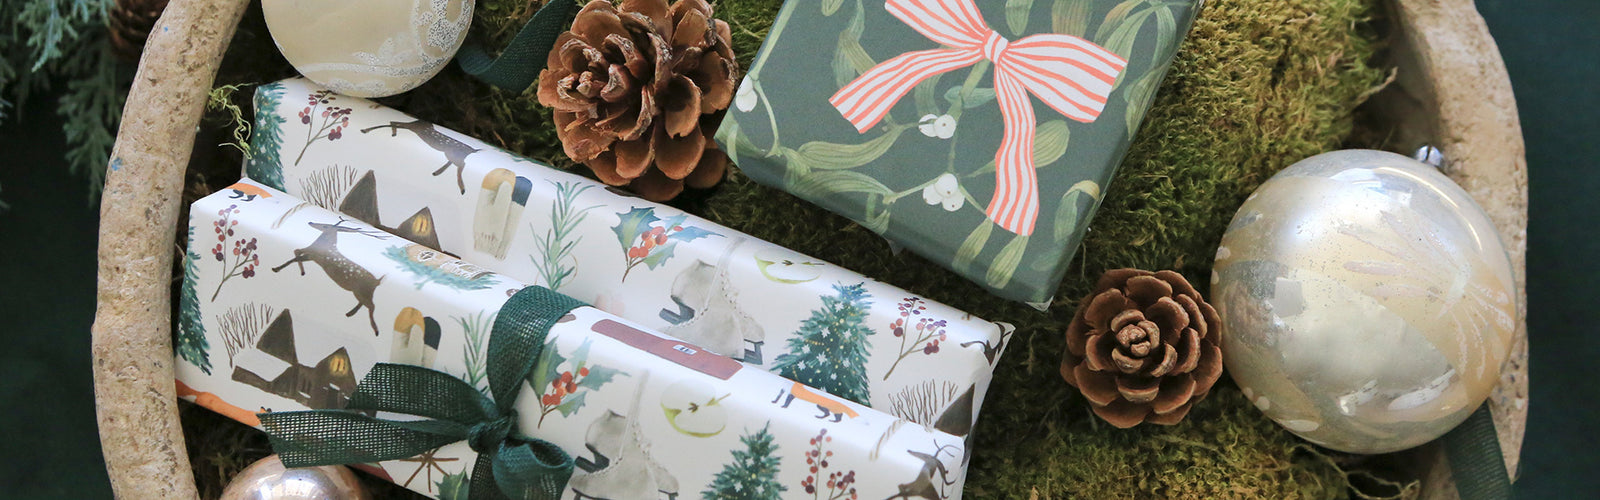 Retro Christmas Wrapping Paper Roll  Sustainable Thick Gift Wrap -  Waterleaf Paper Company